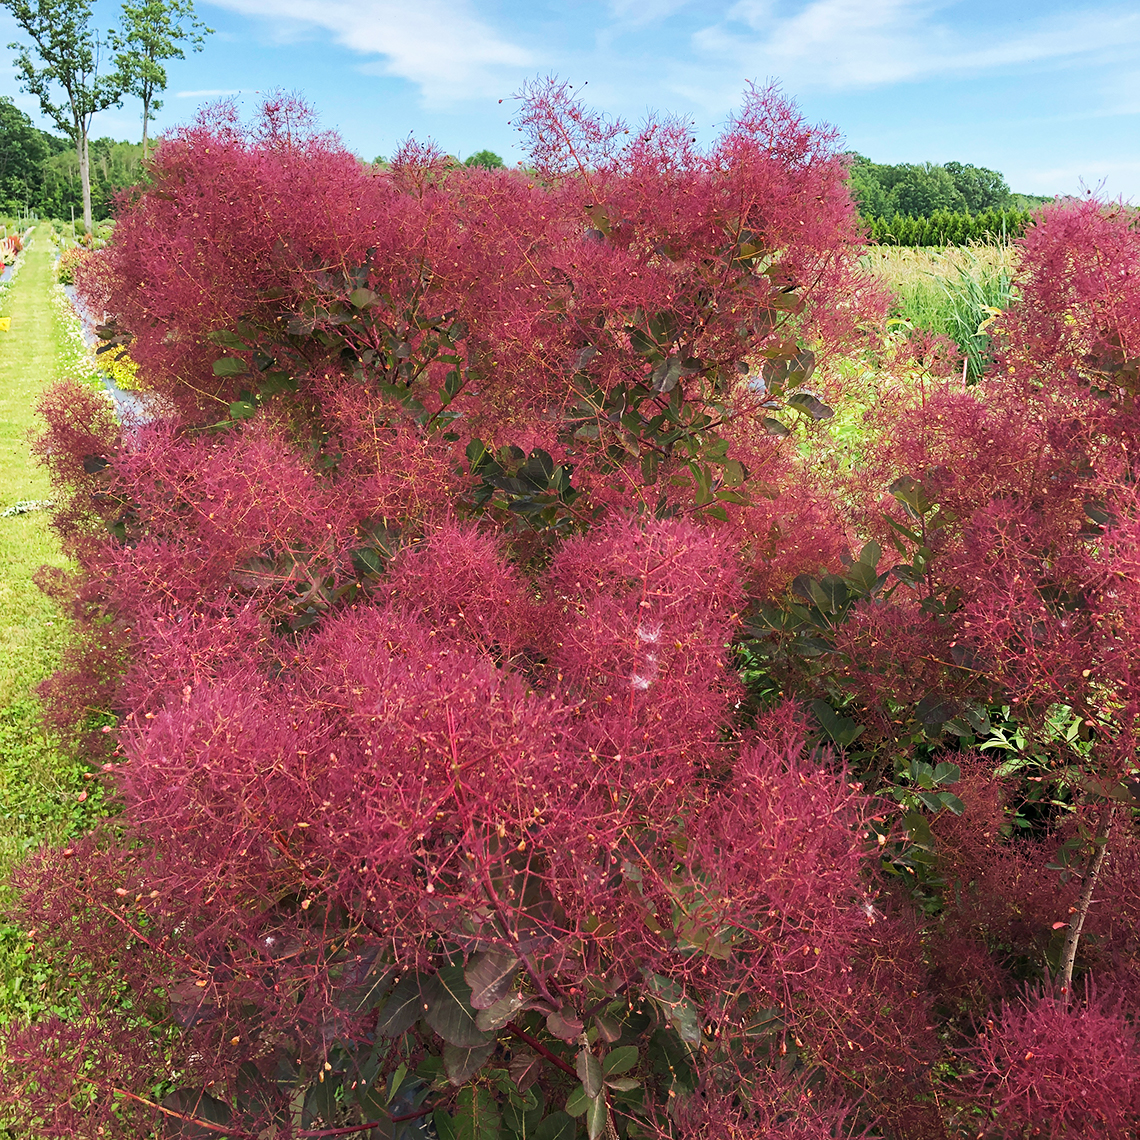 The large pink plumes of Velvet Fog Cotinus